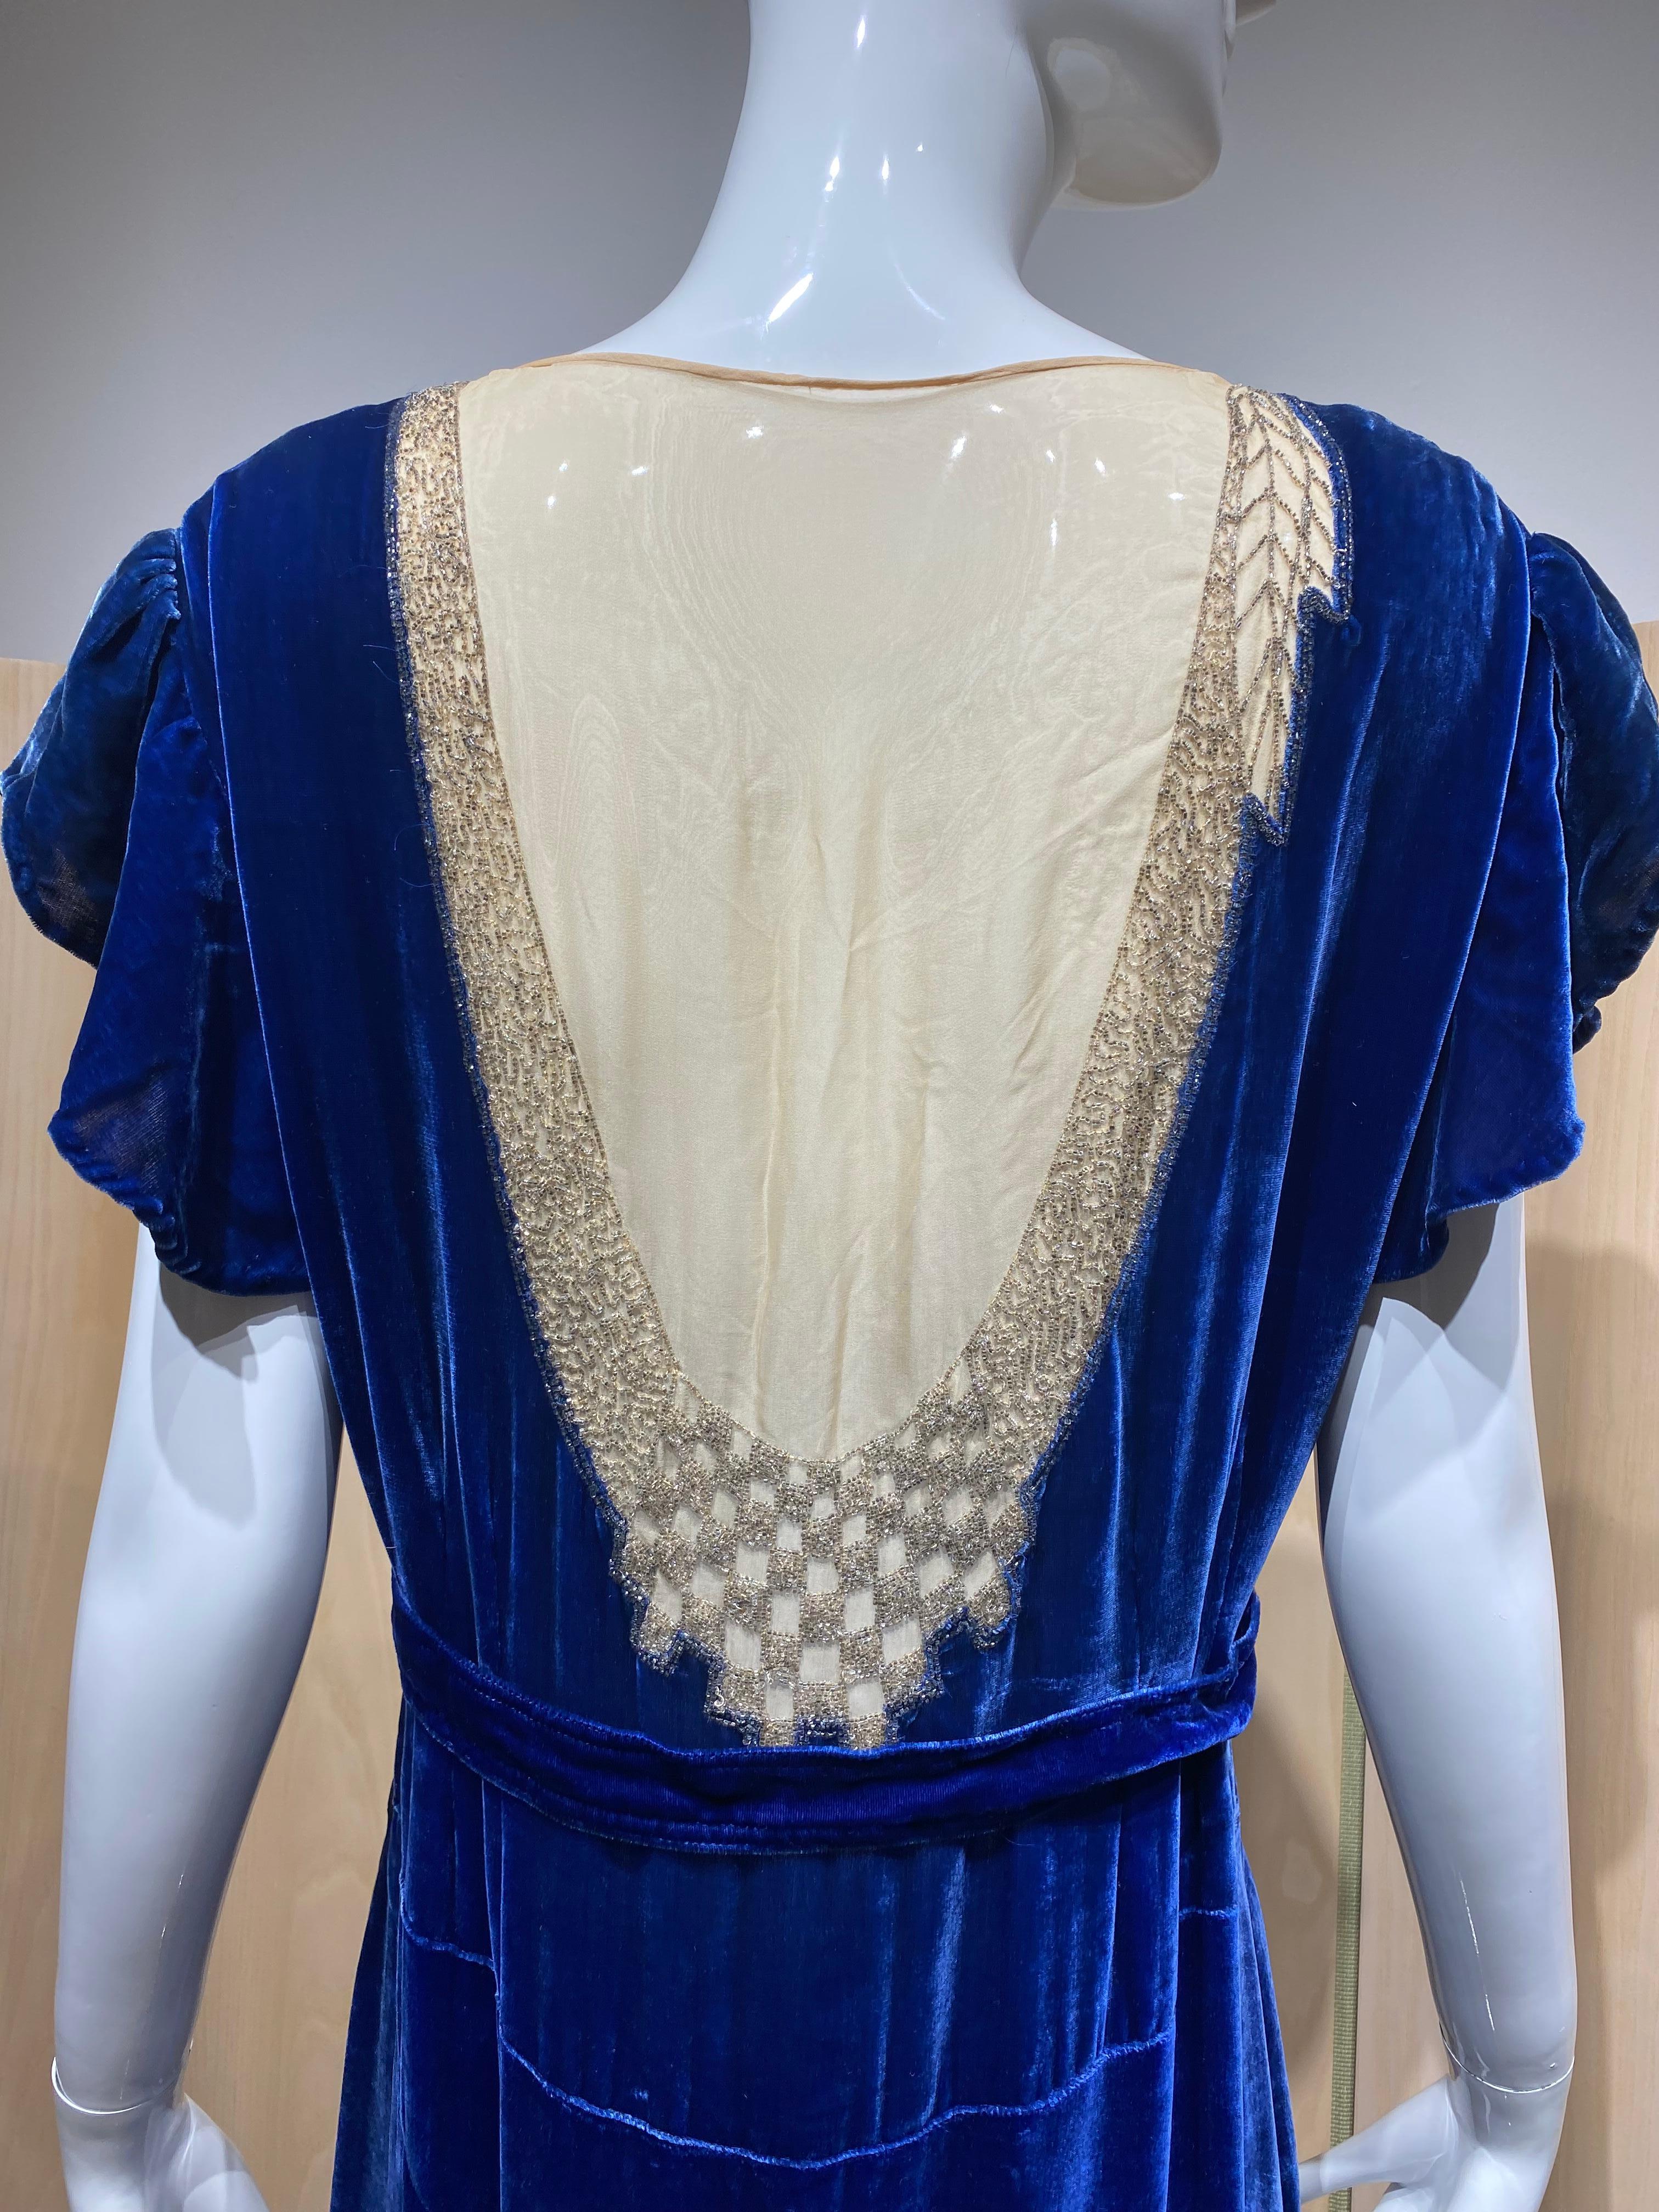 Vintage 1920s art deco blue velvet cocktail dress with silver beads on the neckline and back.
Dress comes with belt.

Size: 6
Bust: 36/ Waist: 28”/Hip :36”